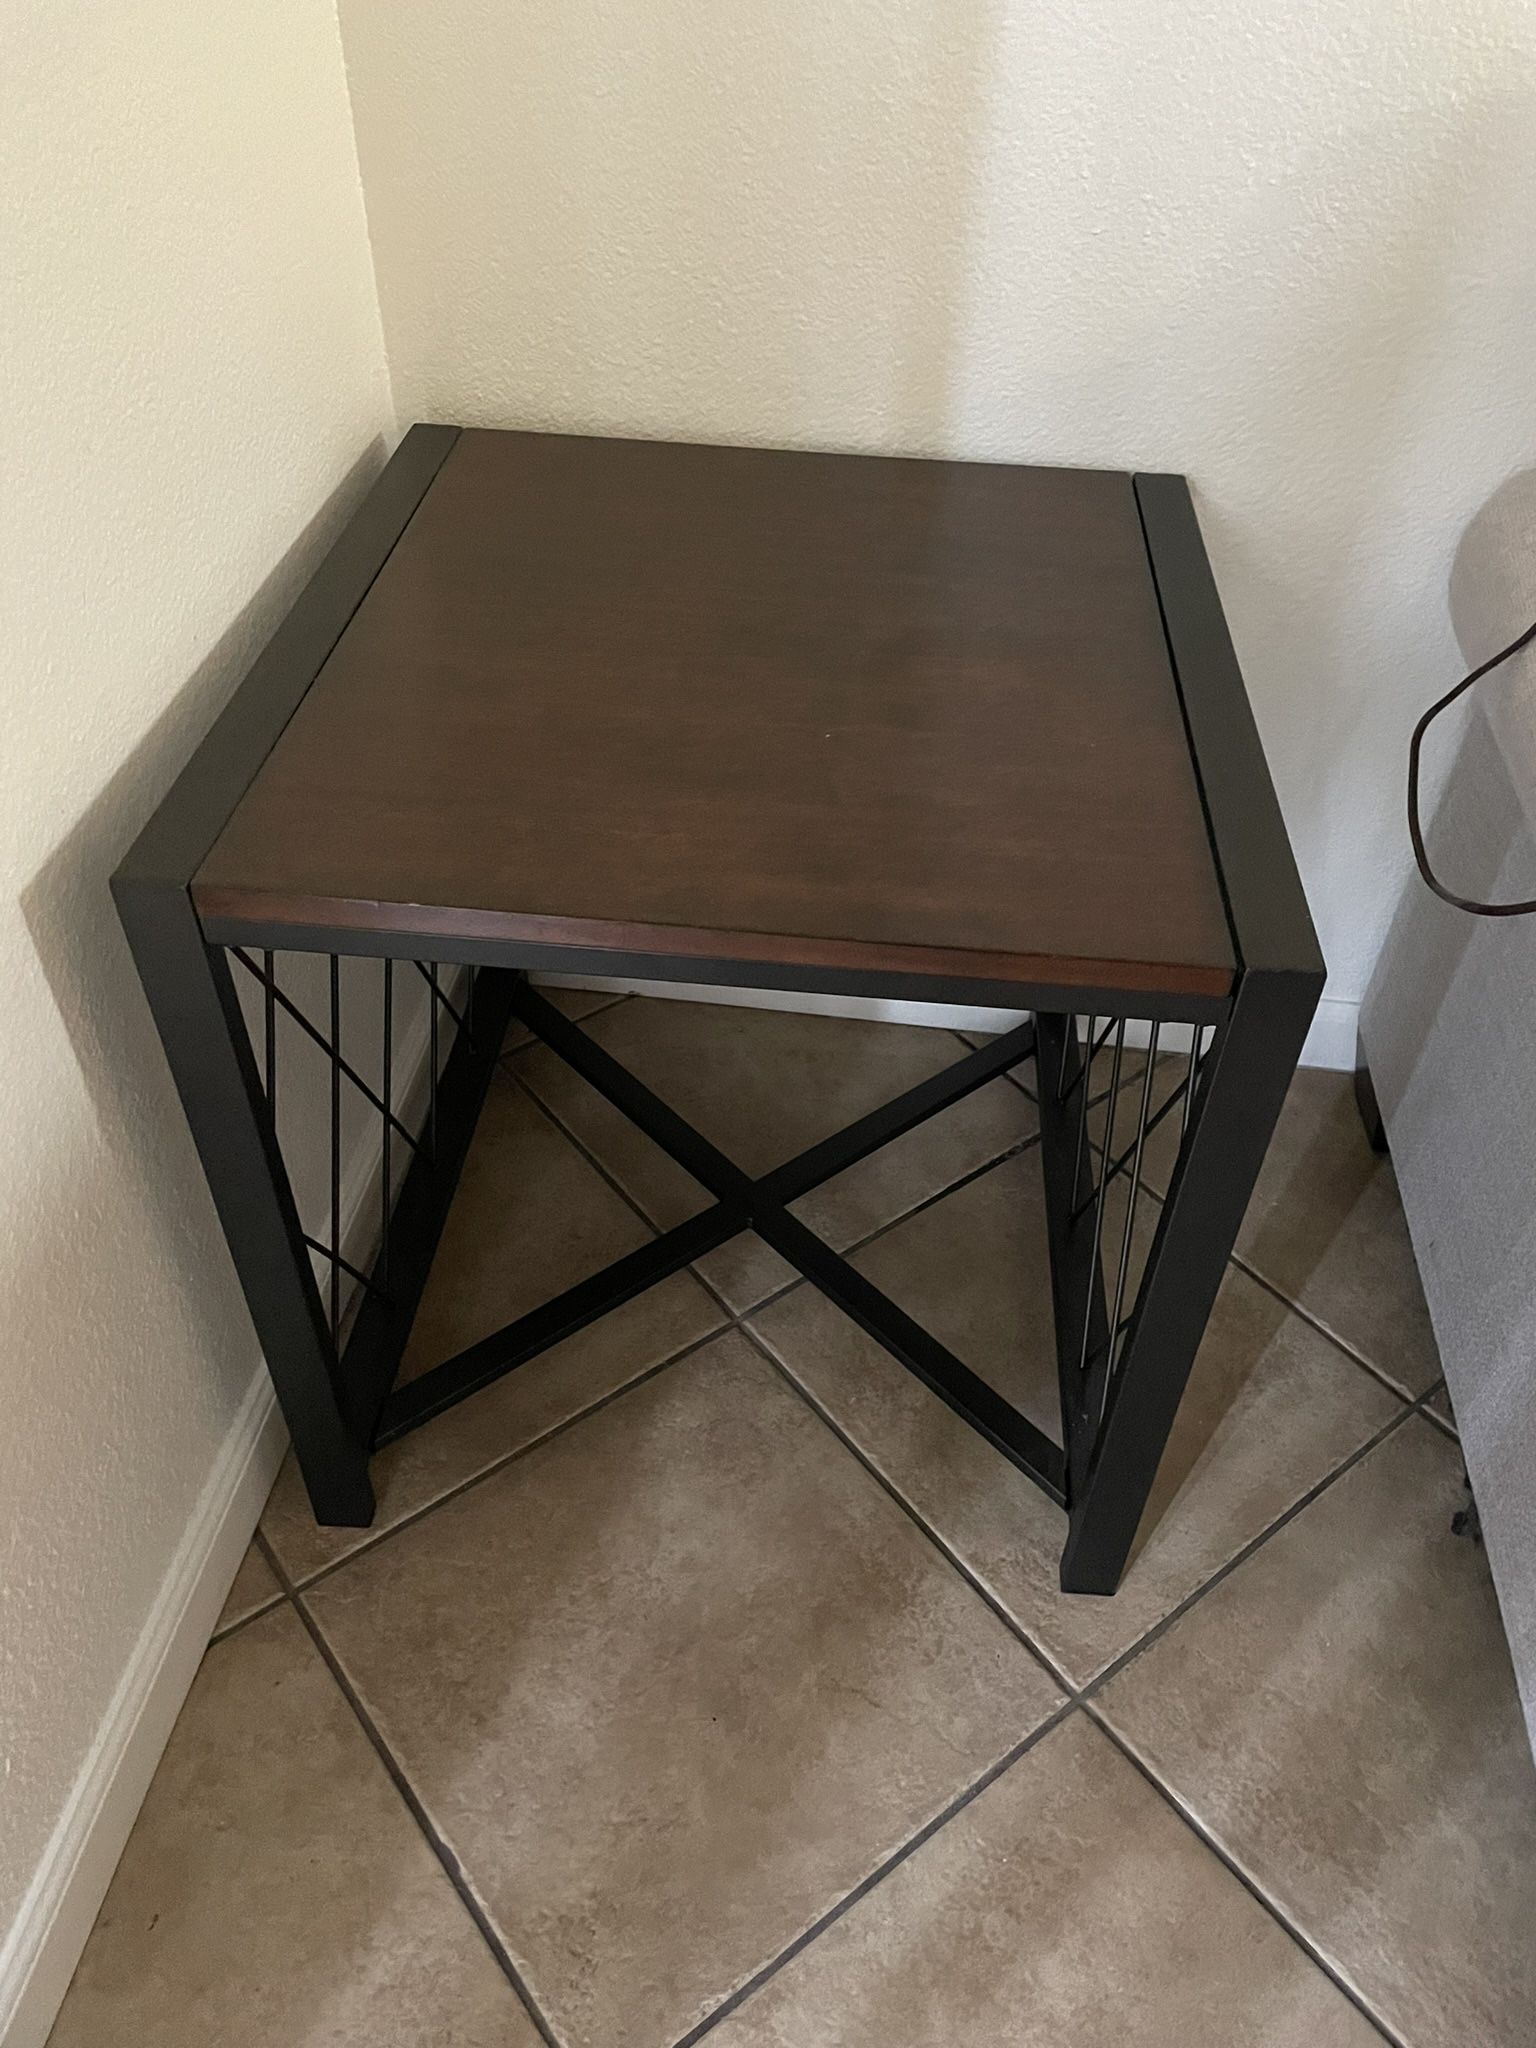 2 Matching End Tables And A Coffee Table